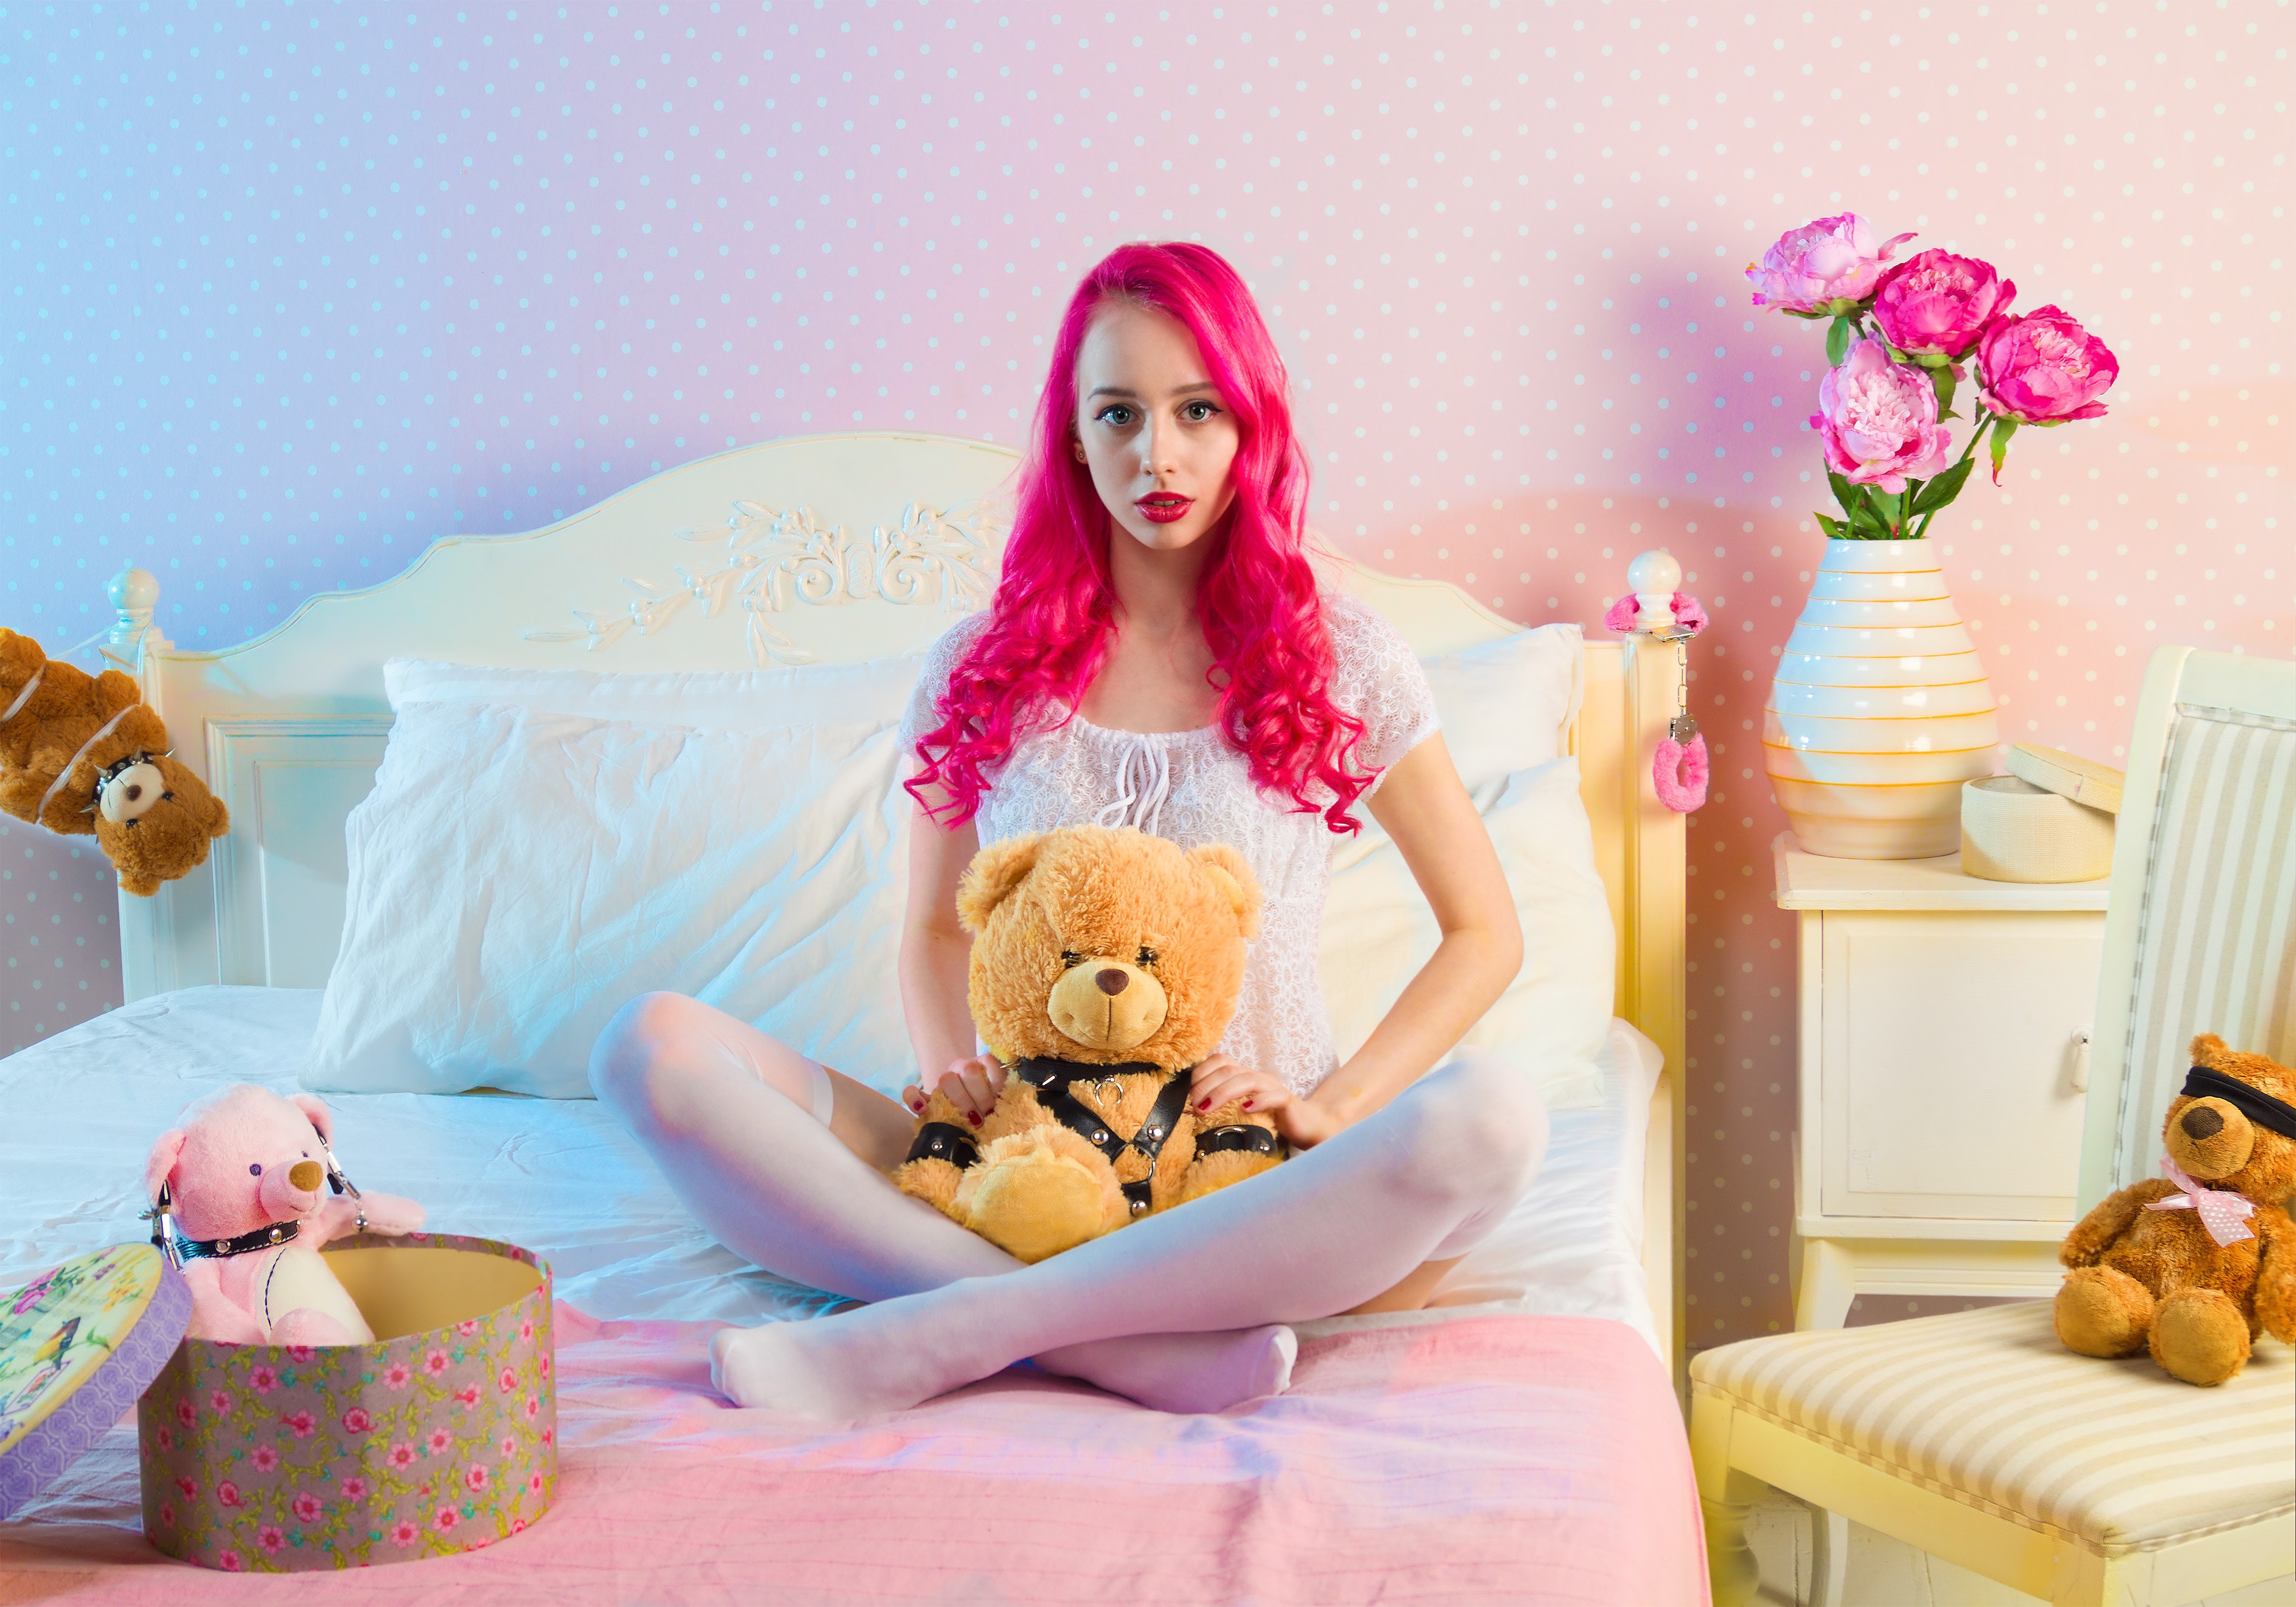 Pink long haired woman sitting on double bed with bear plsuh toy at daylight photo